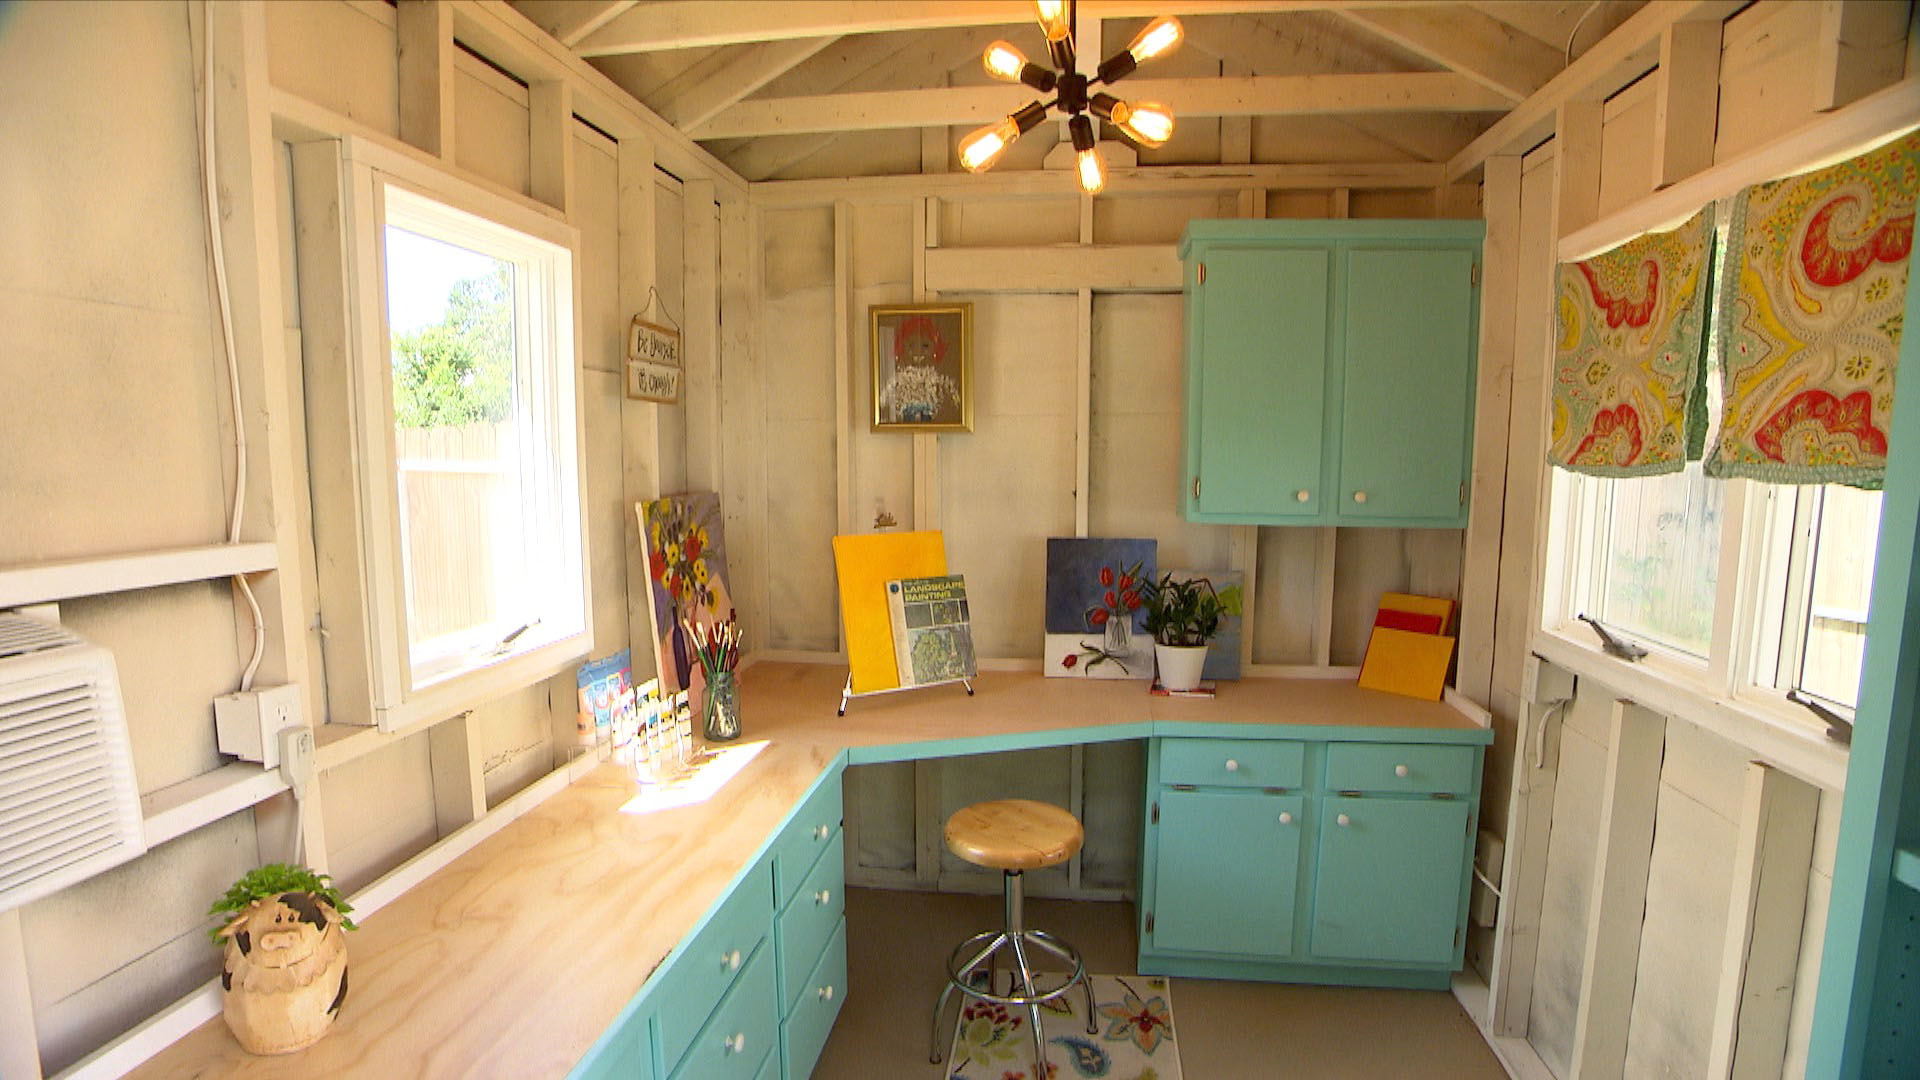 She Shed Interior with new counters and cabinets.